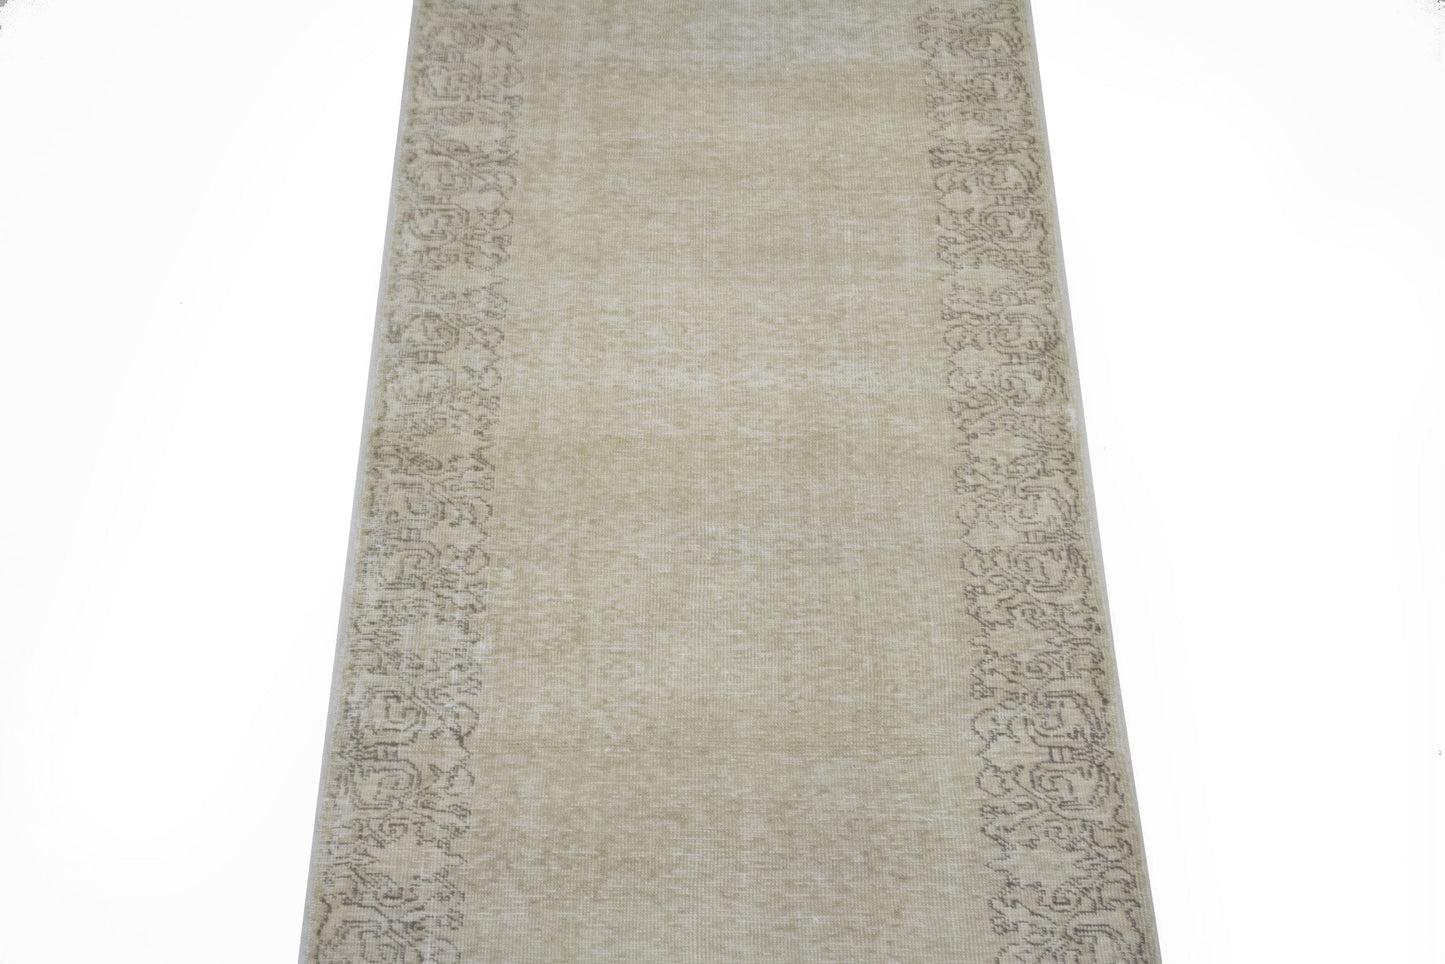 Antique Muted Distressed 3X13 Tabriz Persian Runner Rug